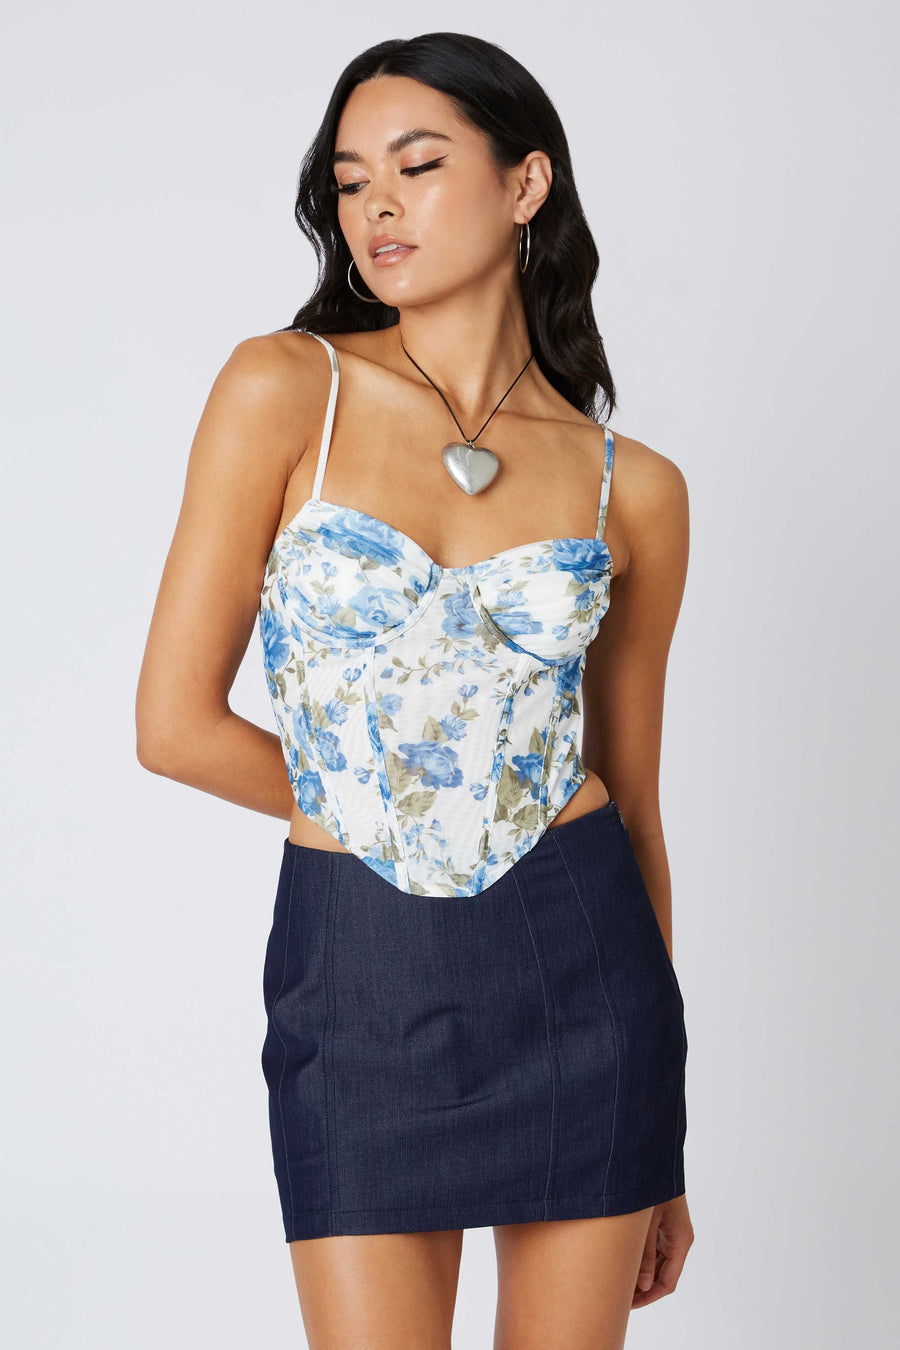 Corset style top with mesh fabric and floral pattern.